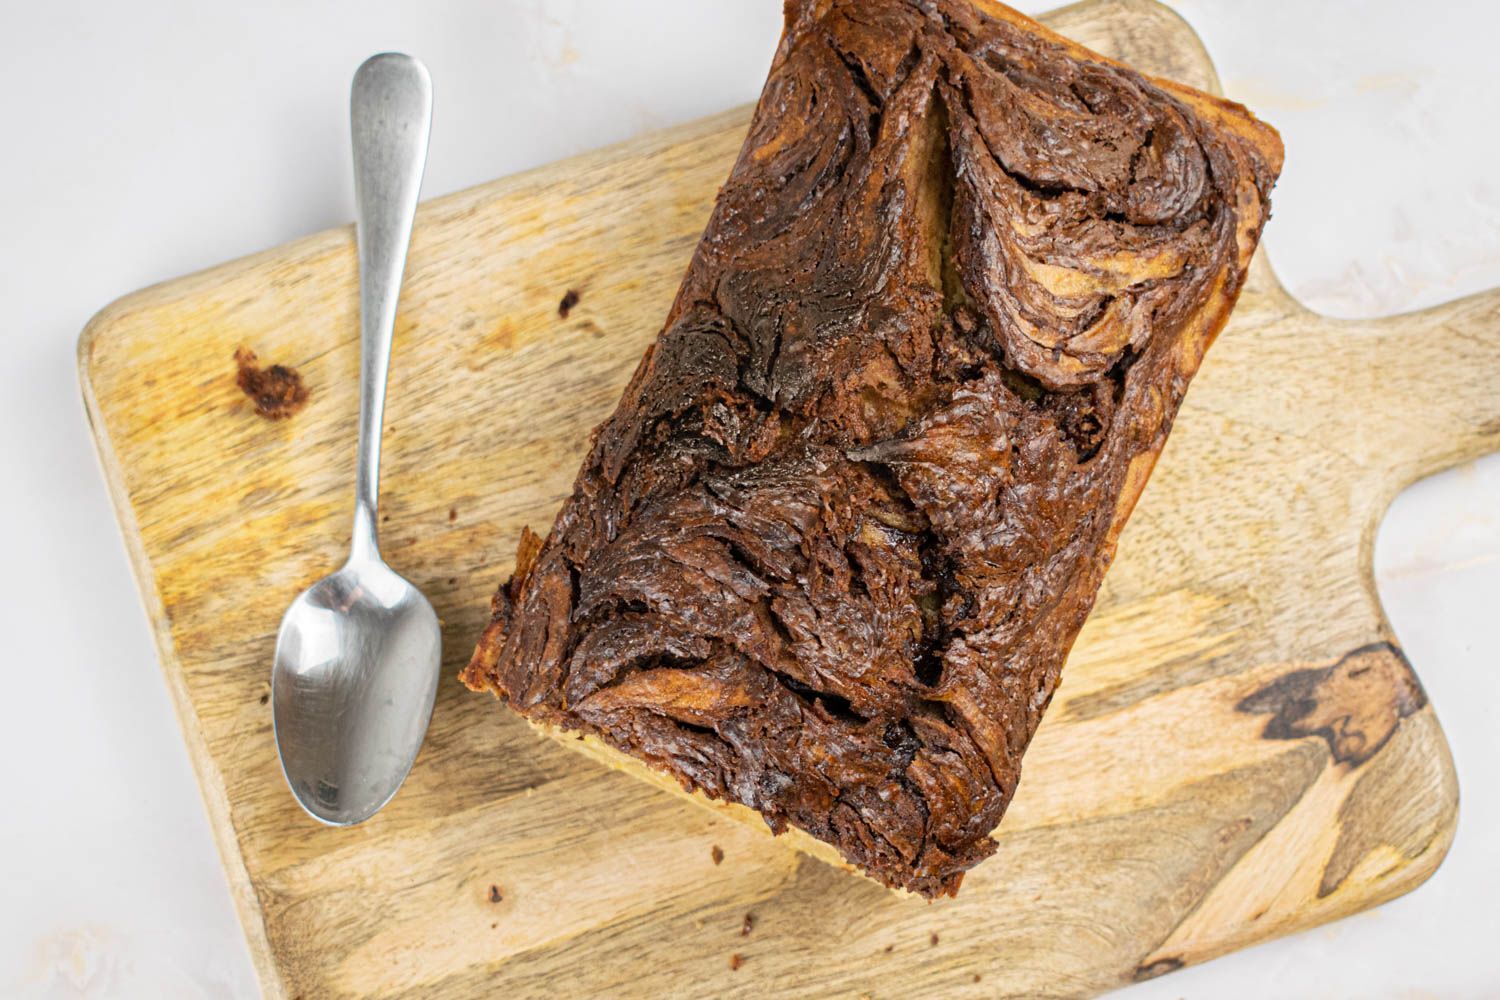 Nutella banana bread with swirls of nutella and banana on a wooden cutting board.